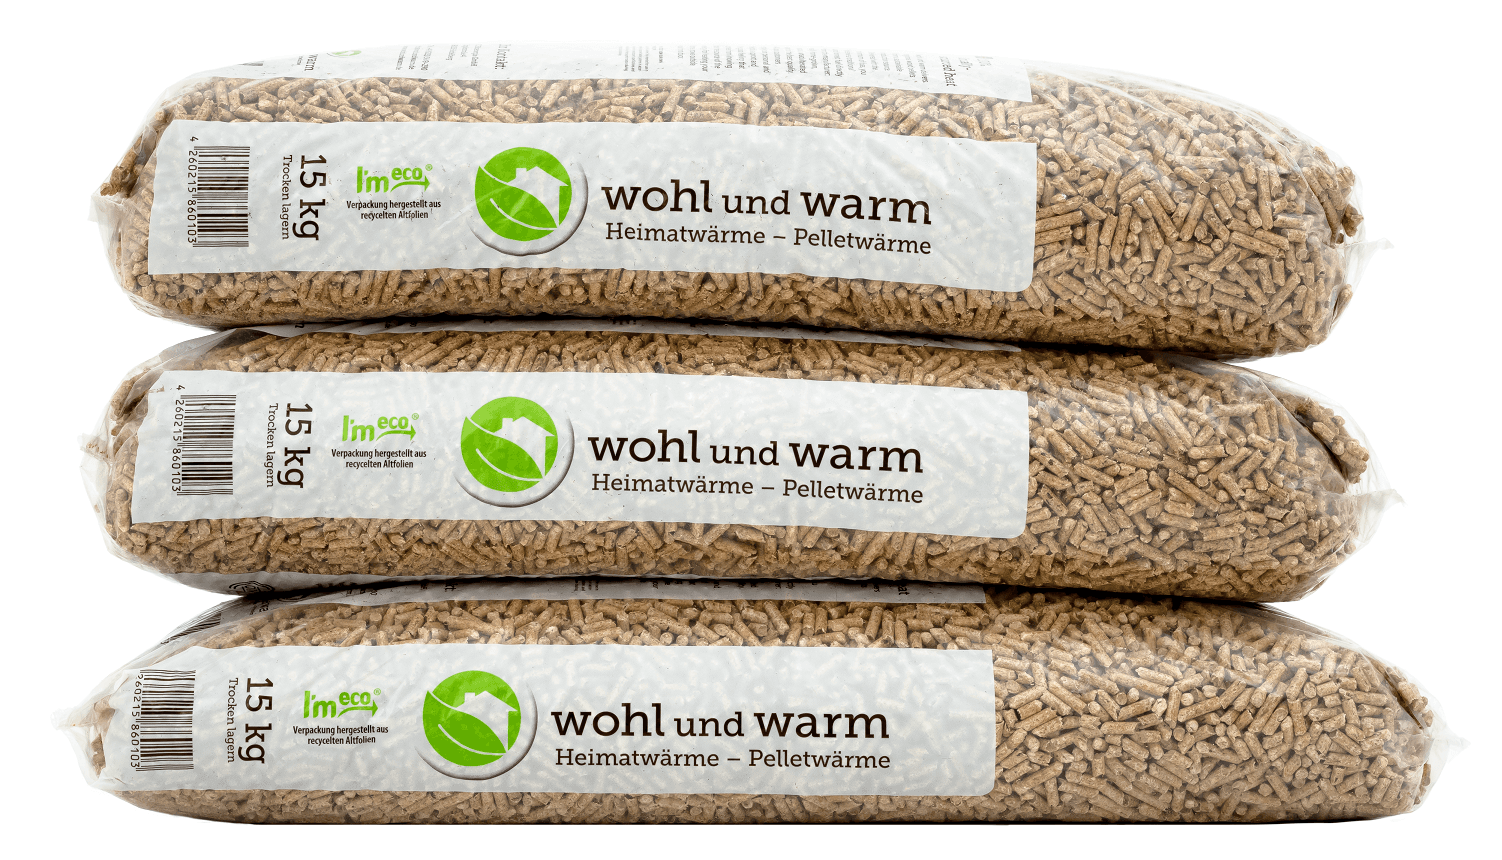 wohl und warm-Pellets in Recyclingfolie verpackt